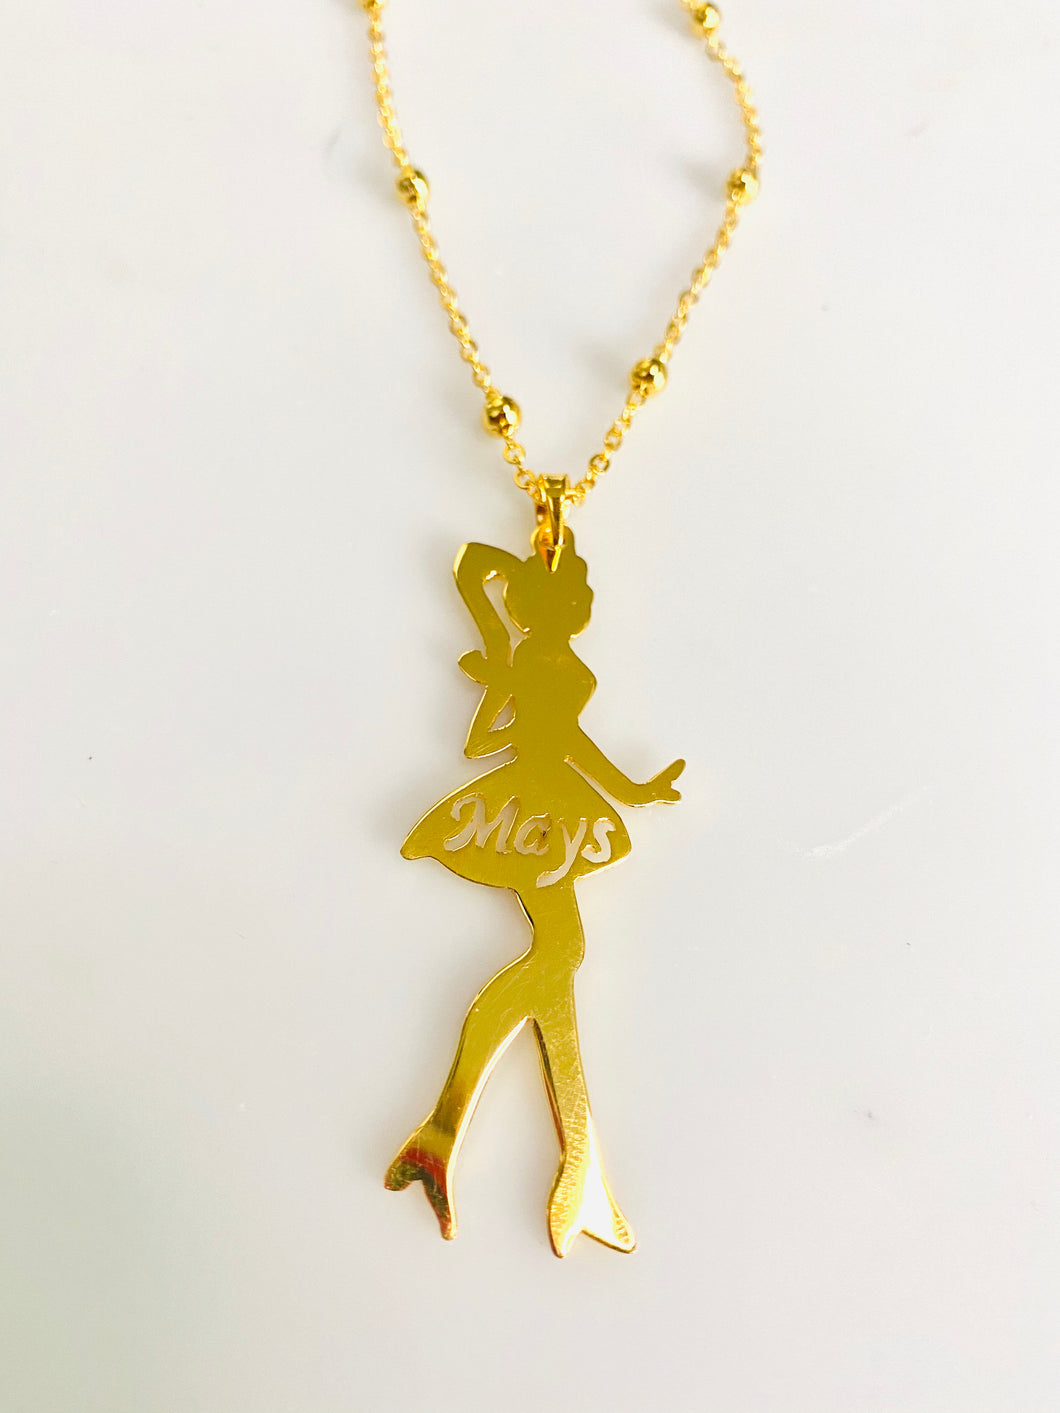 Name Necklace - Girl with Name